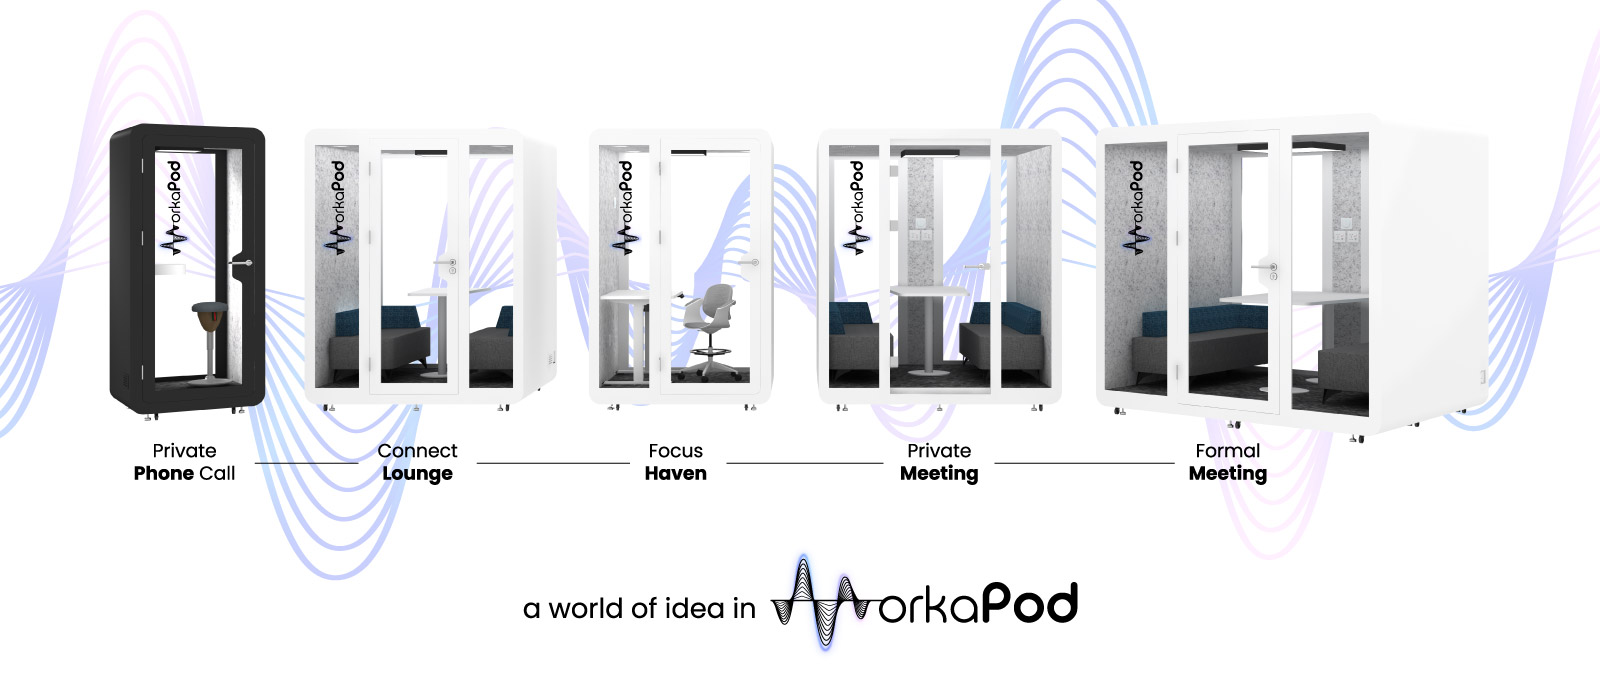 WorkaPod acoustic phone-booth pod for private phone call, meeting interview space and focus work 